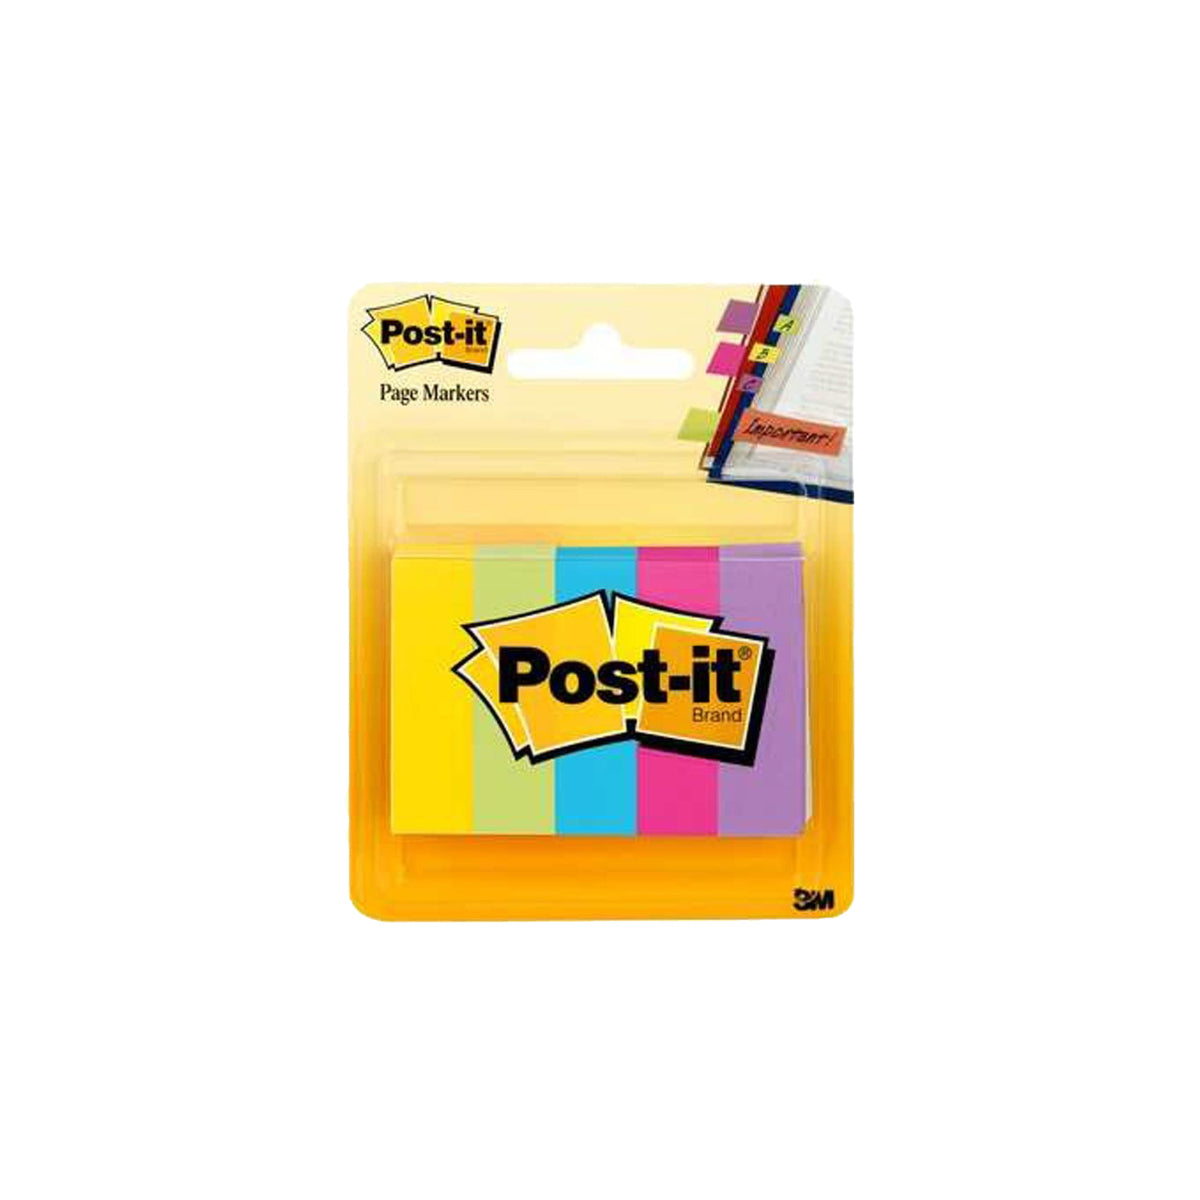 3M Post-it Page Markers 670-5AU, 5pads/pack, Assorted Ultra Colors